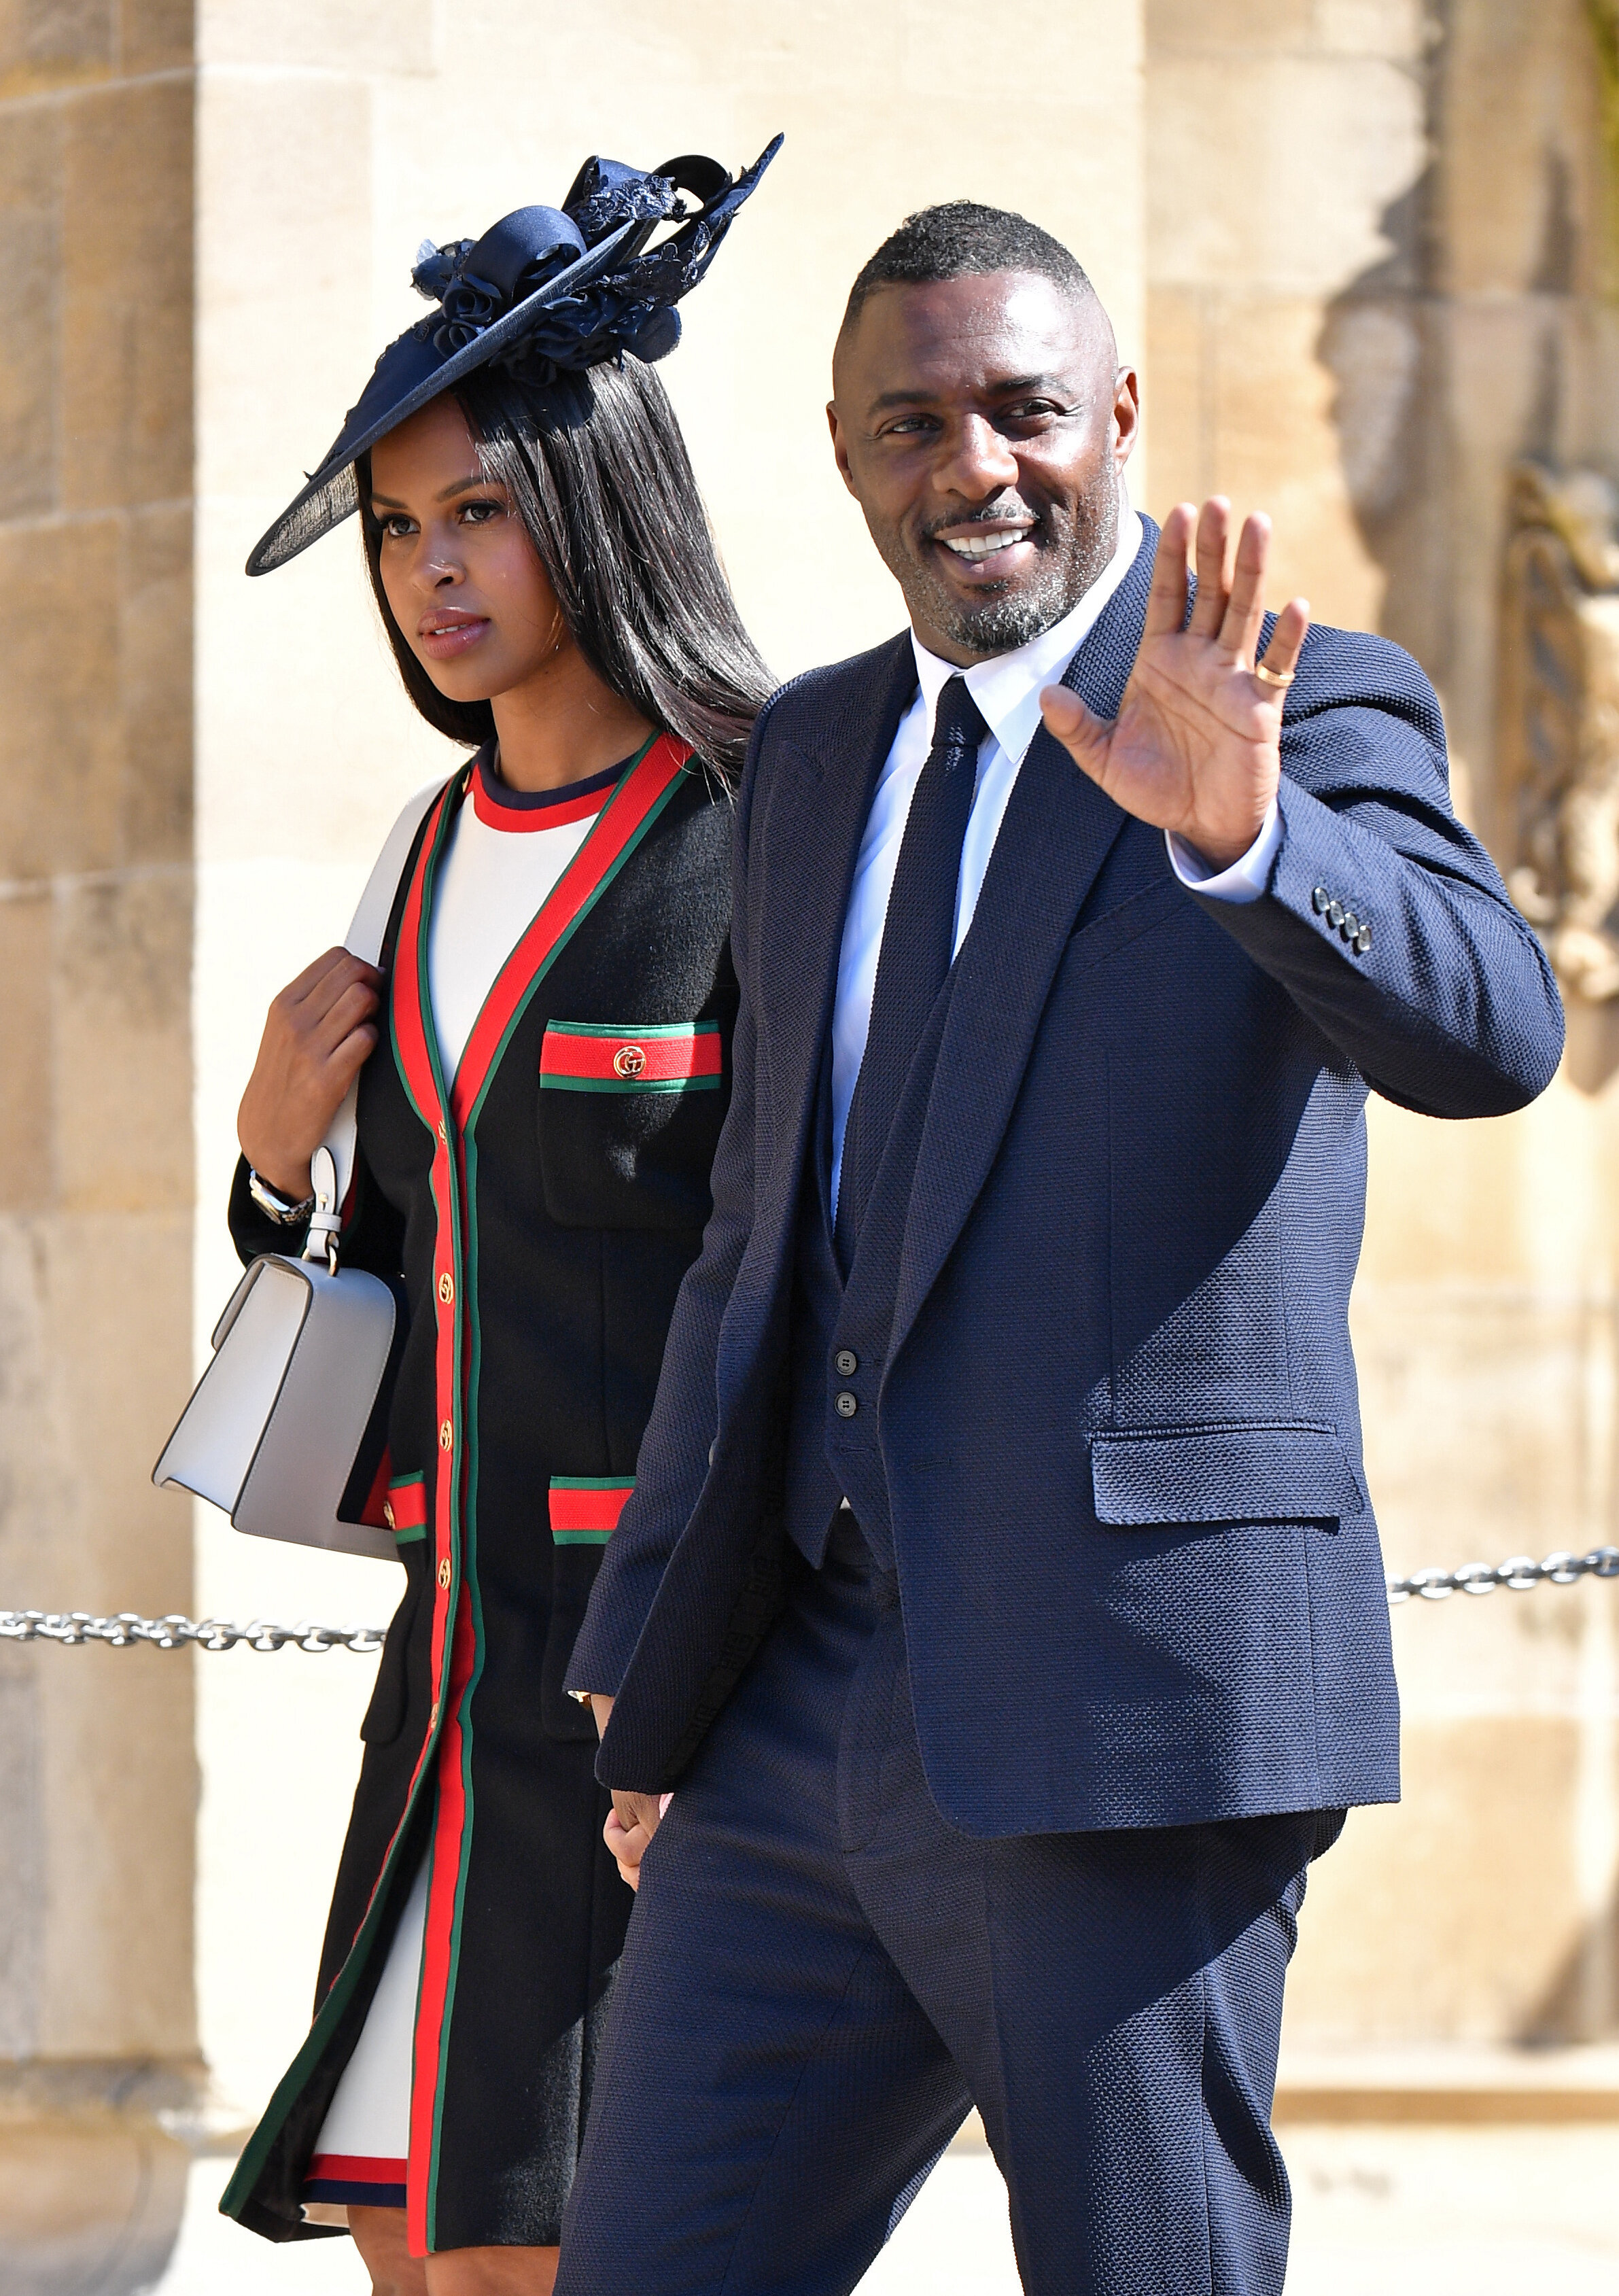 Idris Elba Marries Sabrina Dhowre In Stunning Moroccan Wedding Ceremony HuffPost Entertainment picture